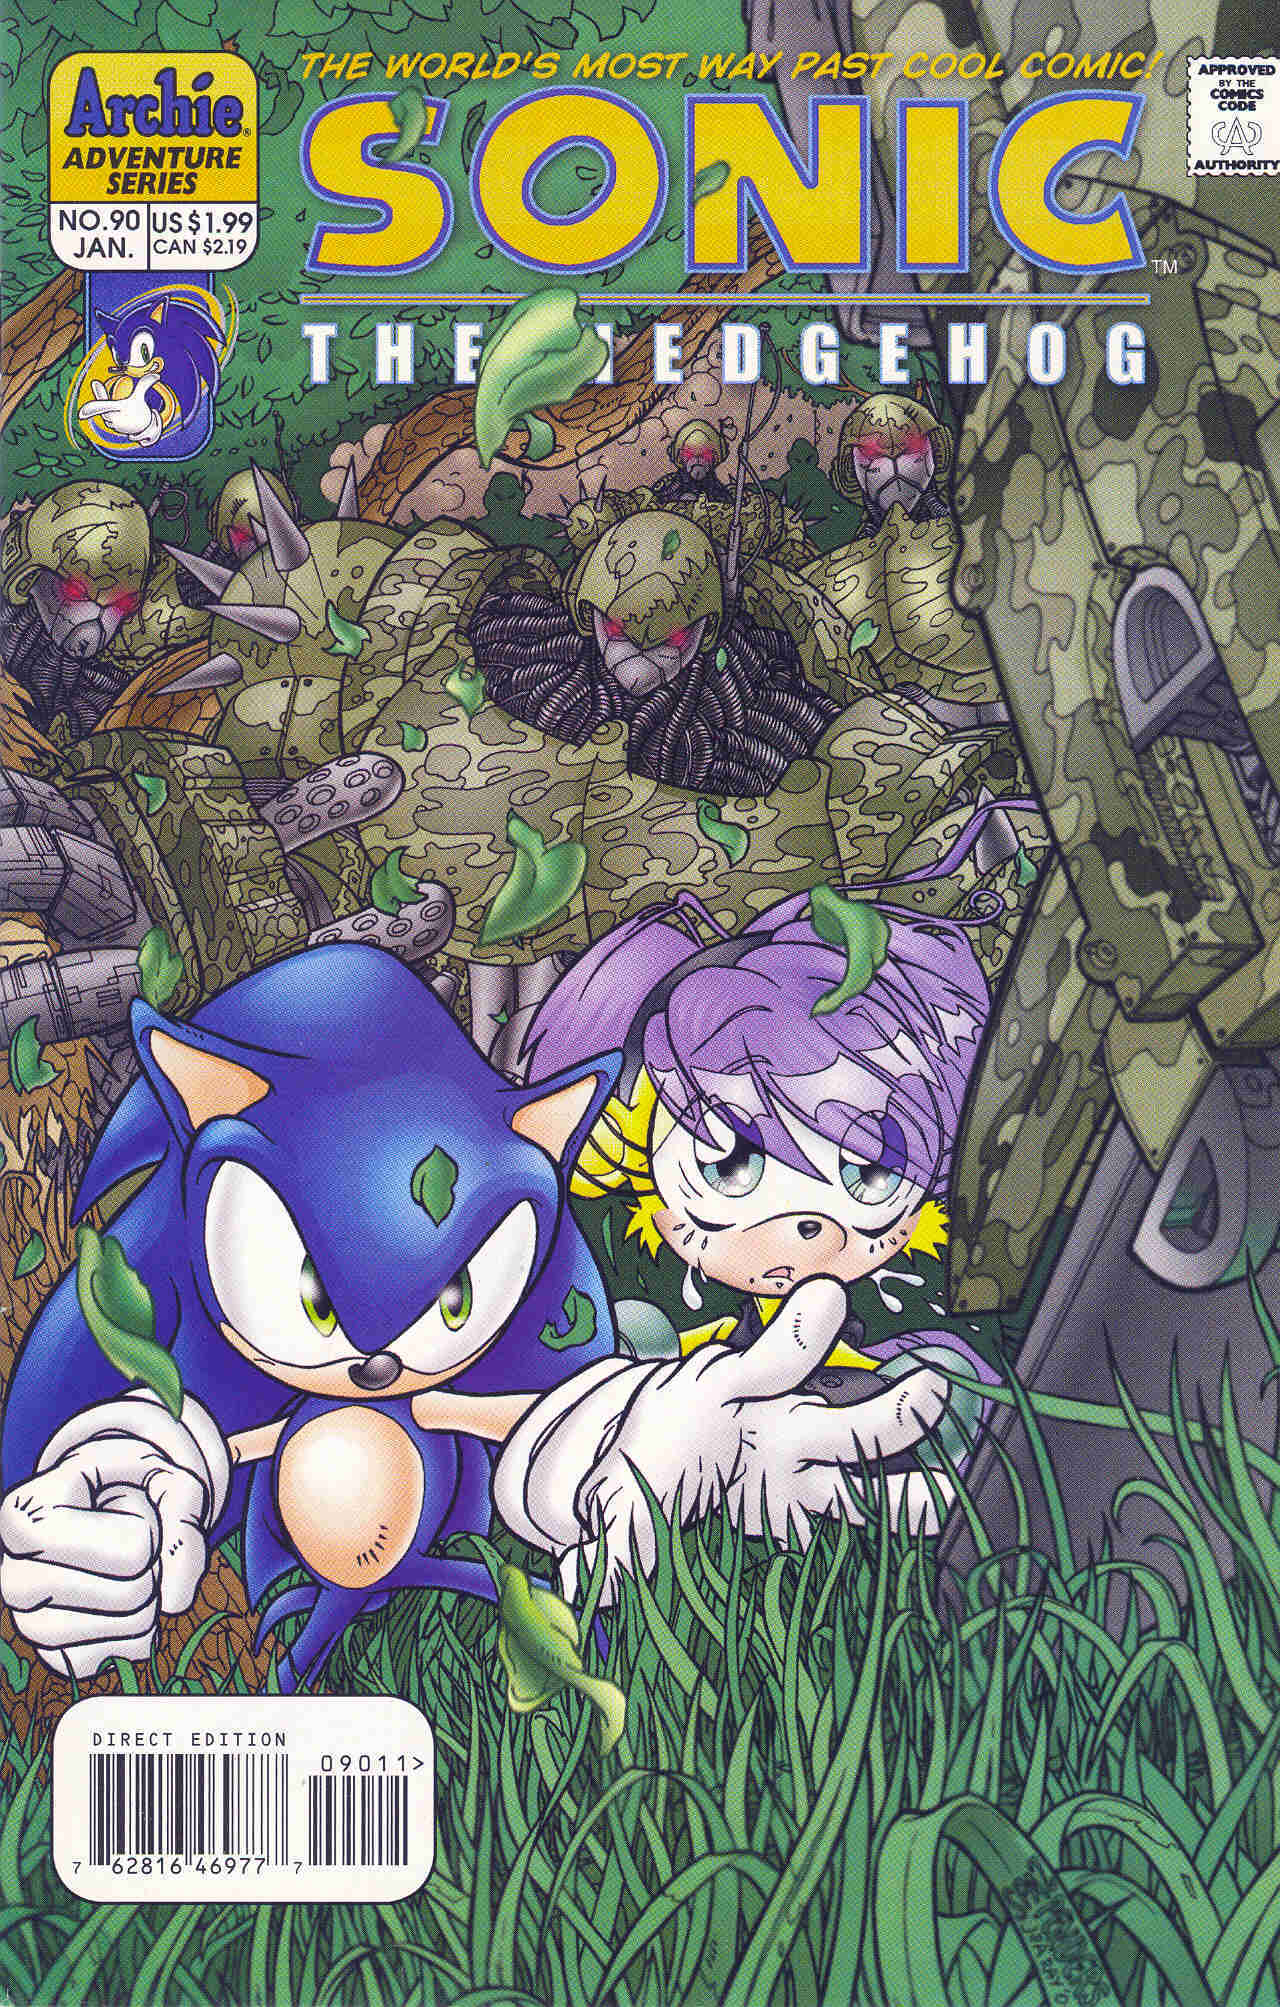 Sonic - Archie Adventure Series January 2001 Comic cover page